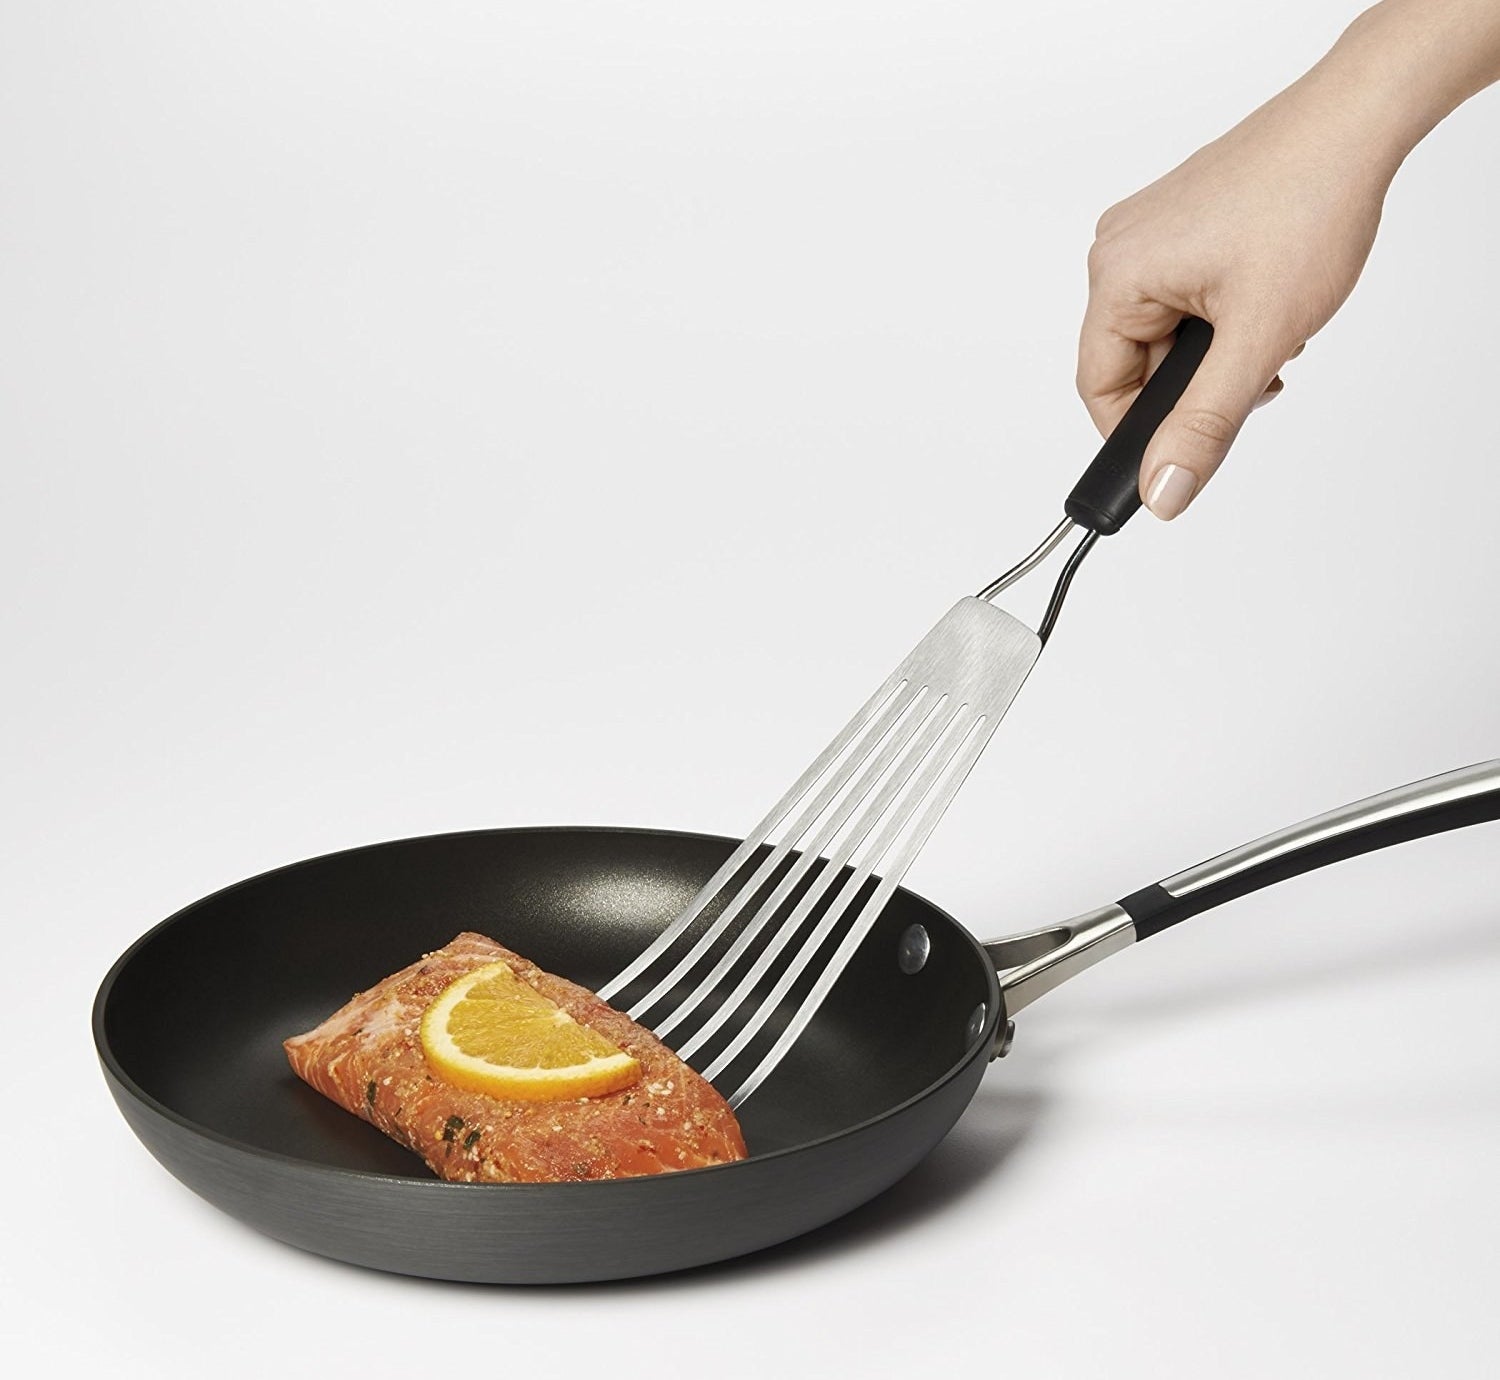 The spatula is being used to flip fish